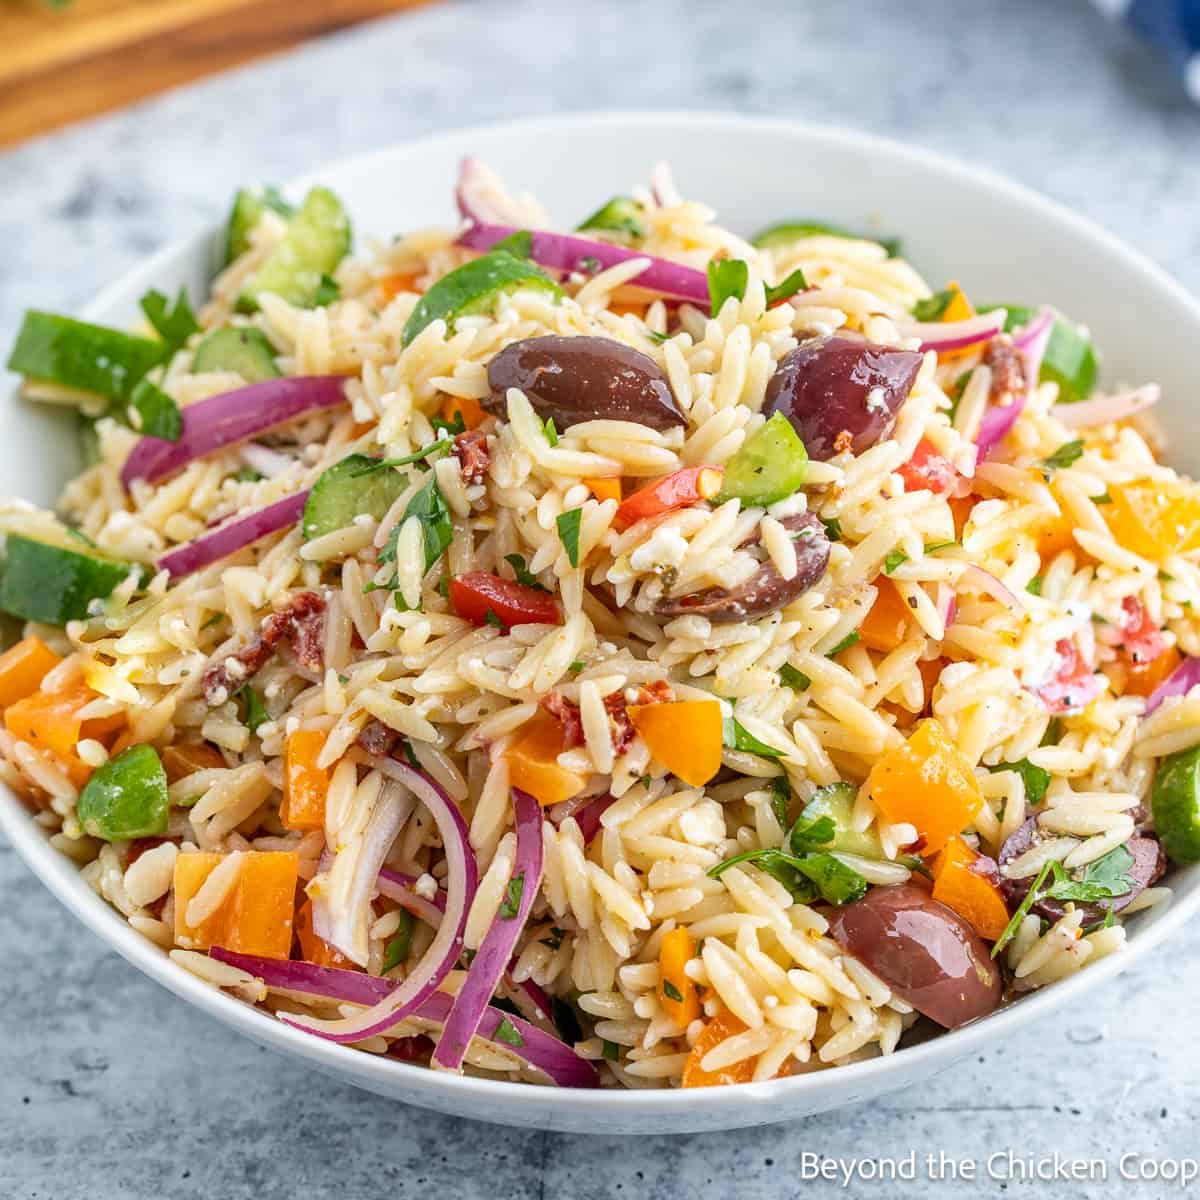 An orzo pasta salad with onions, olives and peppers.